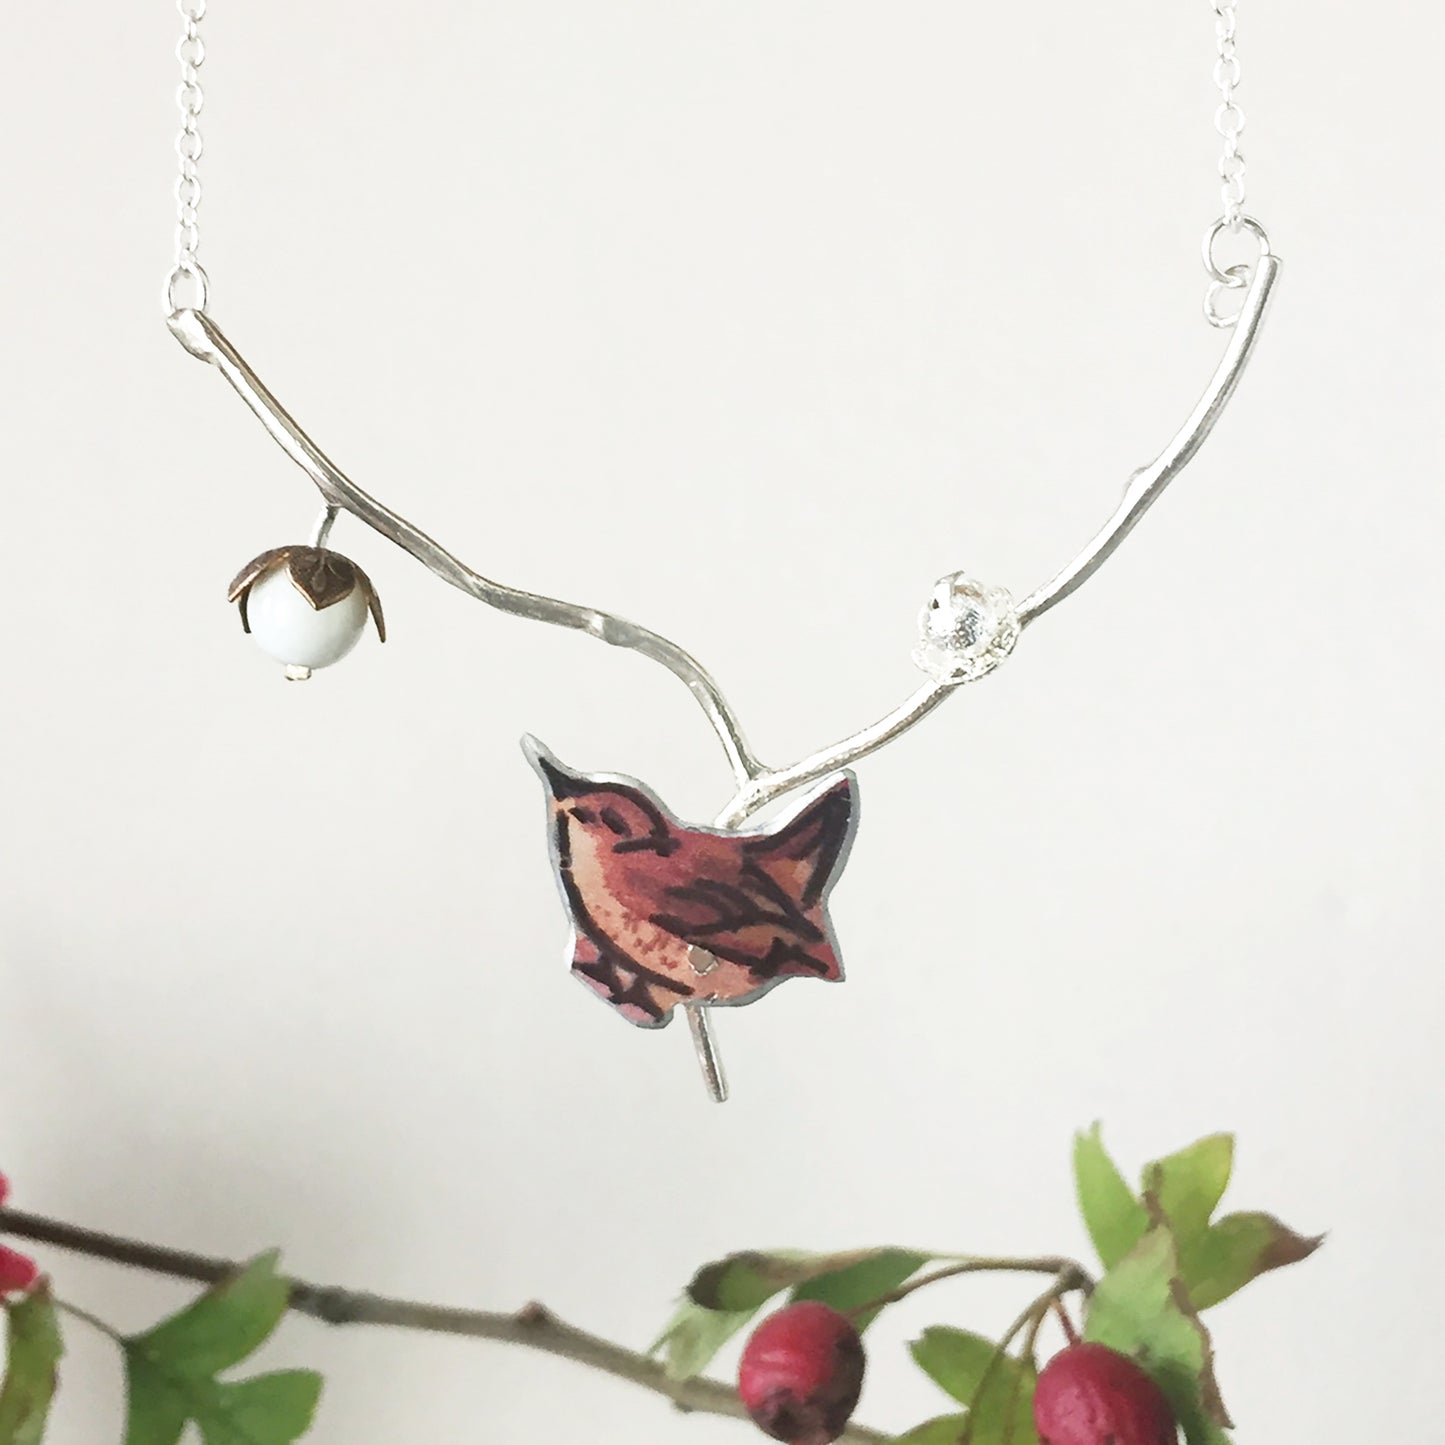 Wren with pearl bud necklace